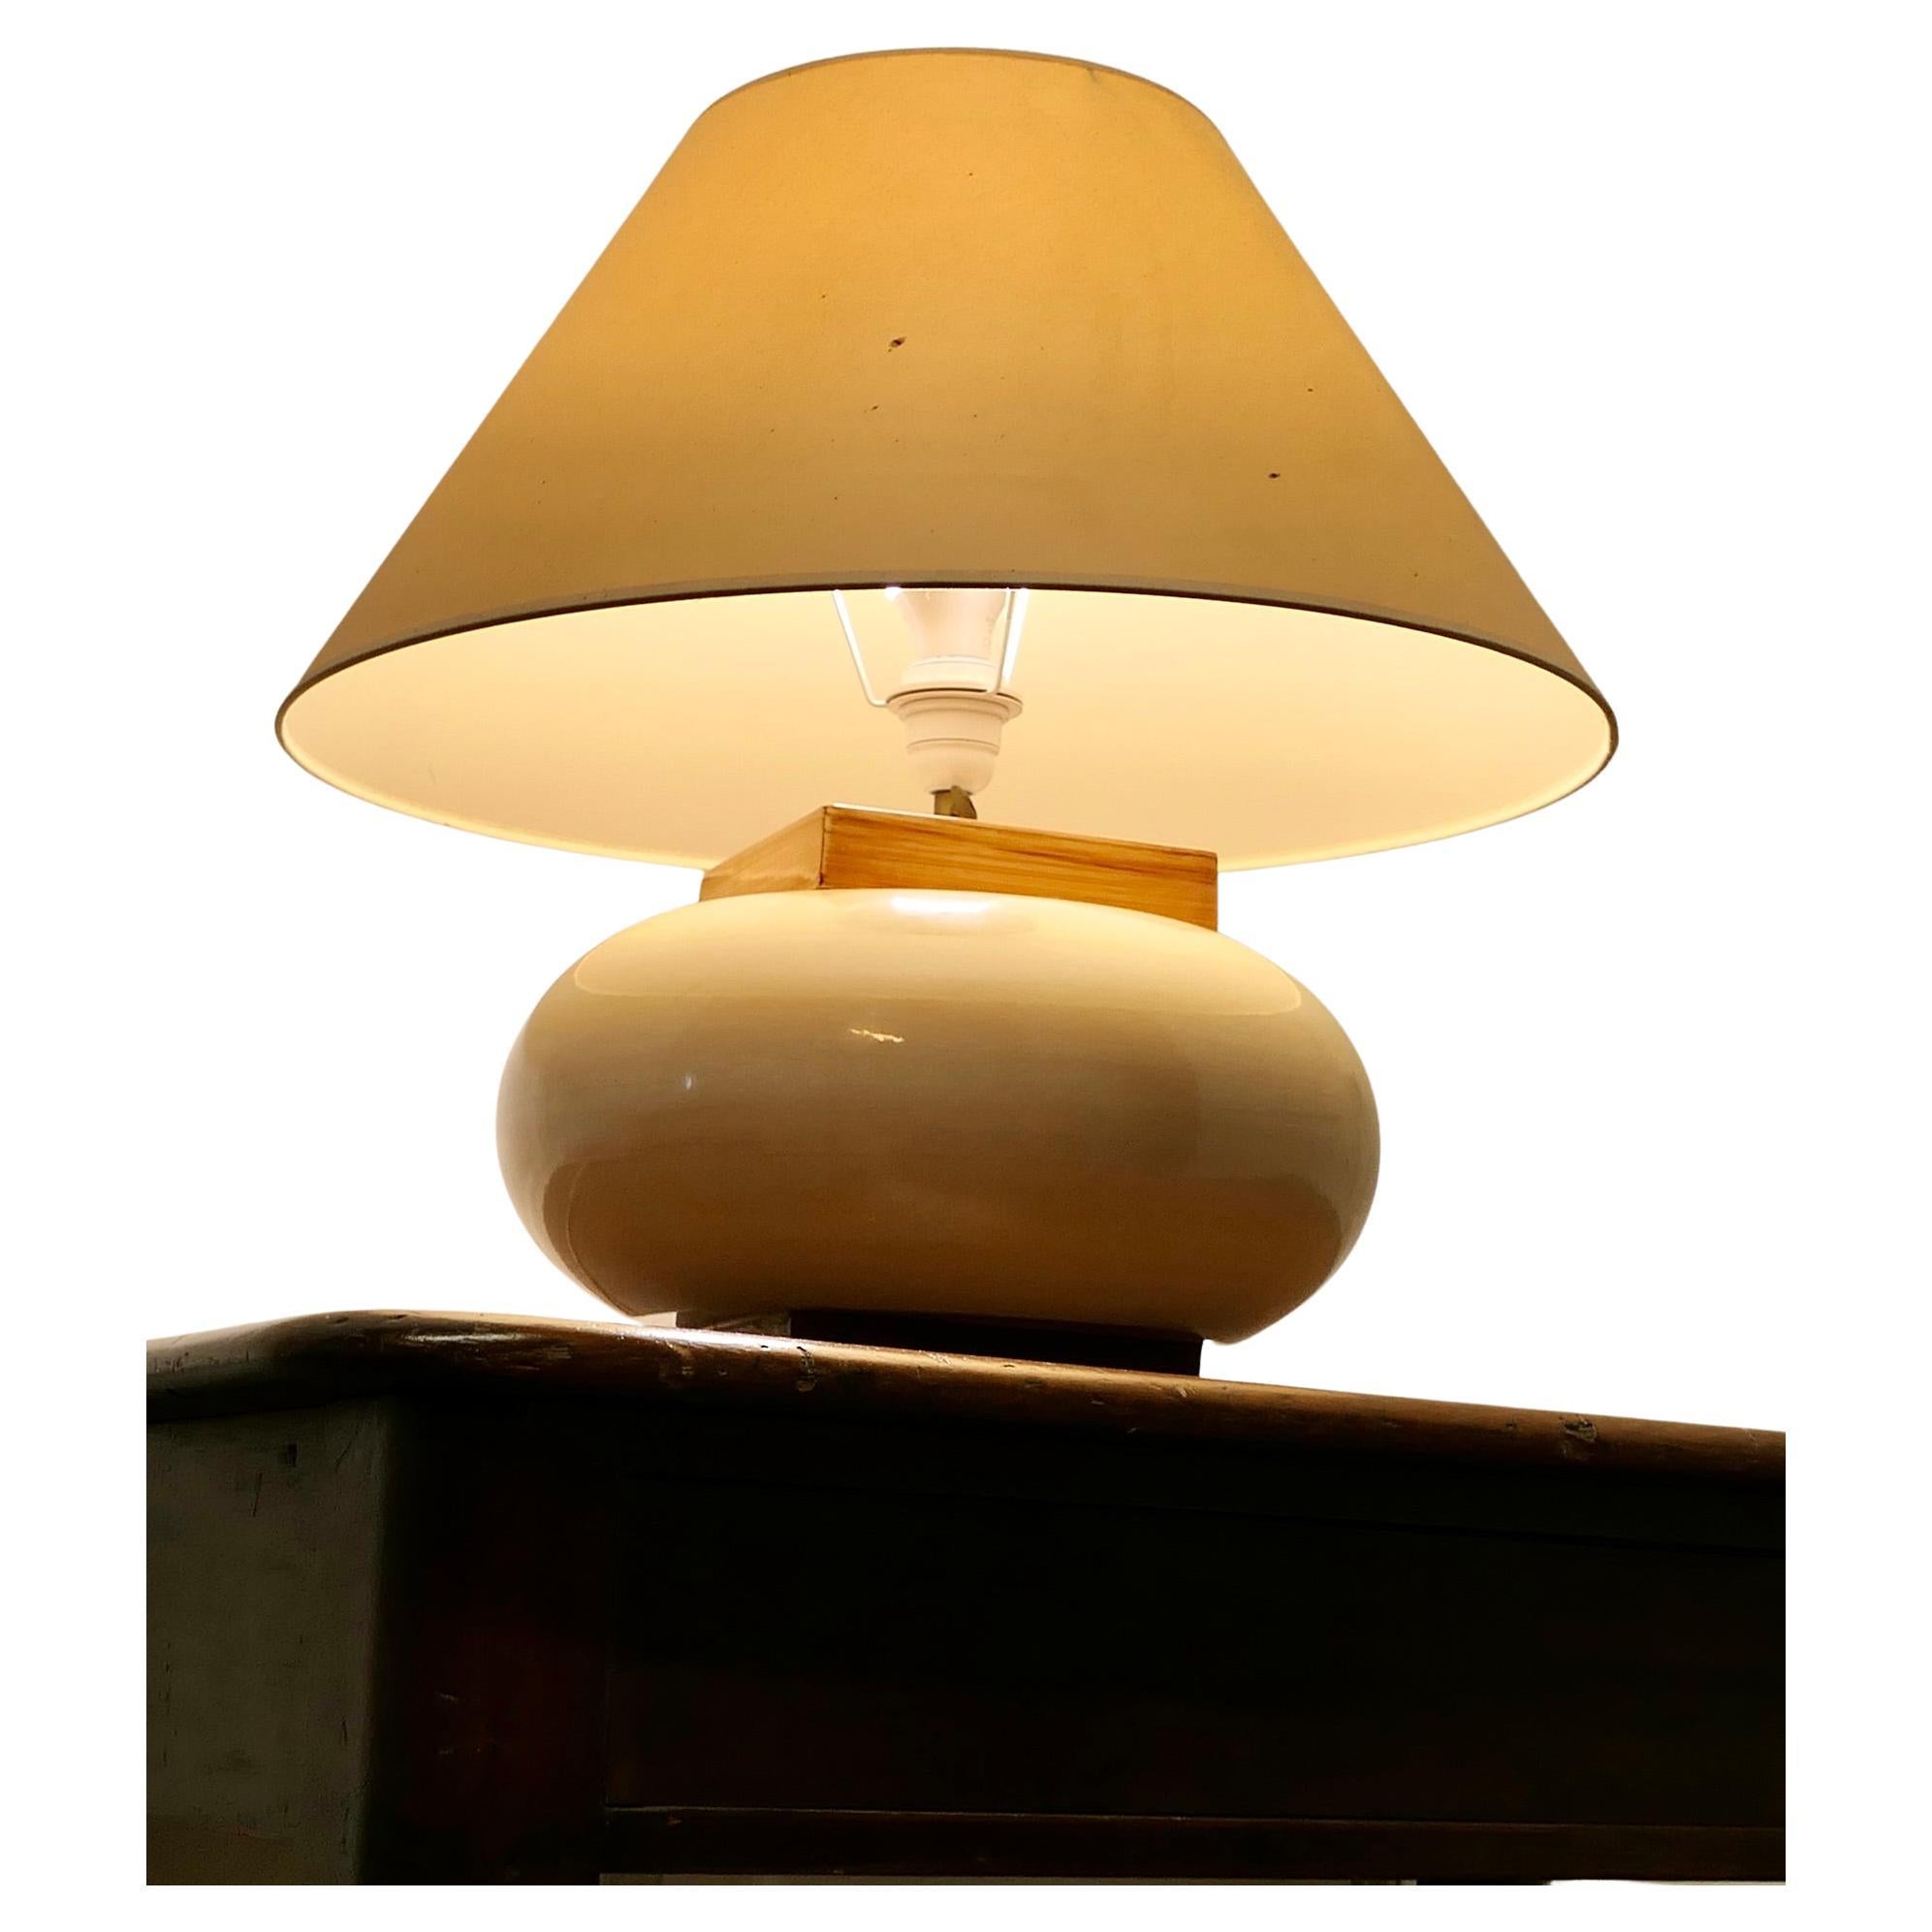 A Large Kostka Sideboard Pebble Lamp    For Sale